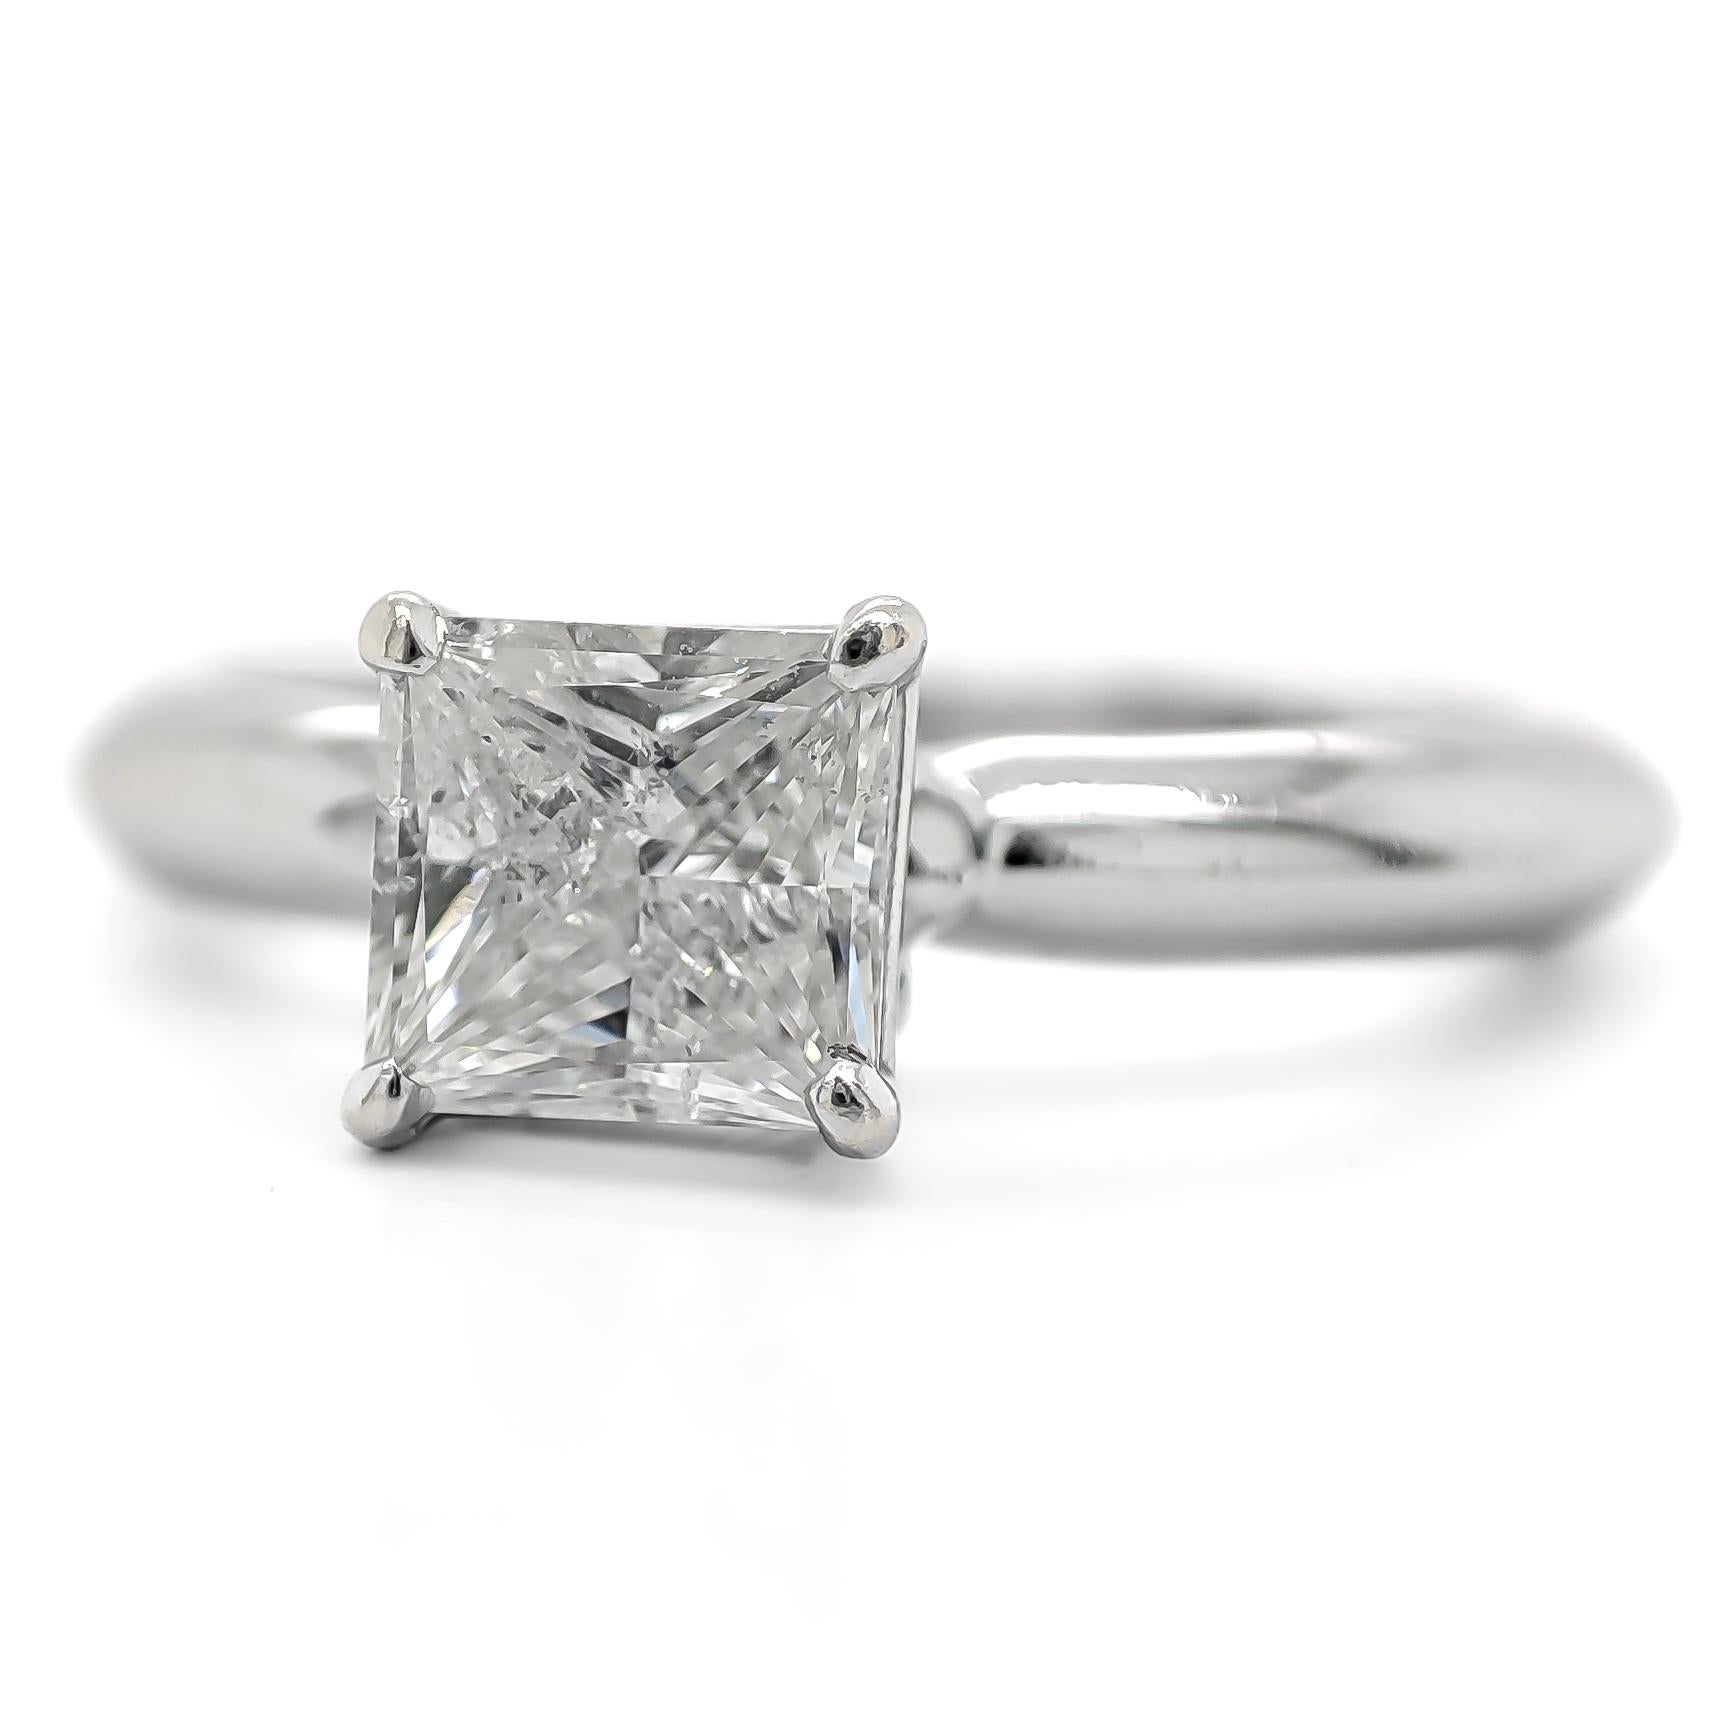 FOR US CUSTOMER NO VAT!

This stunning solitaire engagement ring features a captivating 0.80 carat princess-cut diamond, elegantly set in 14K white gold. The modern and sophisticated design is perfect for showcasing the brilliance of the central